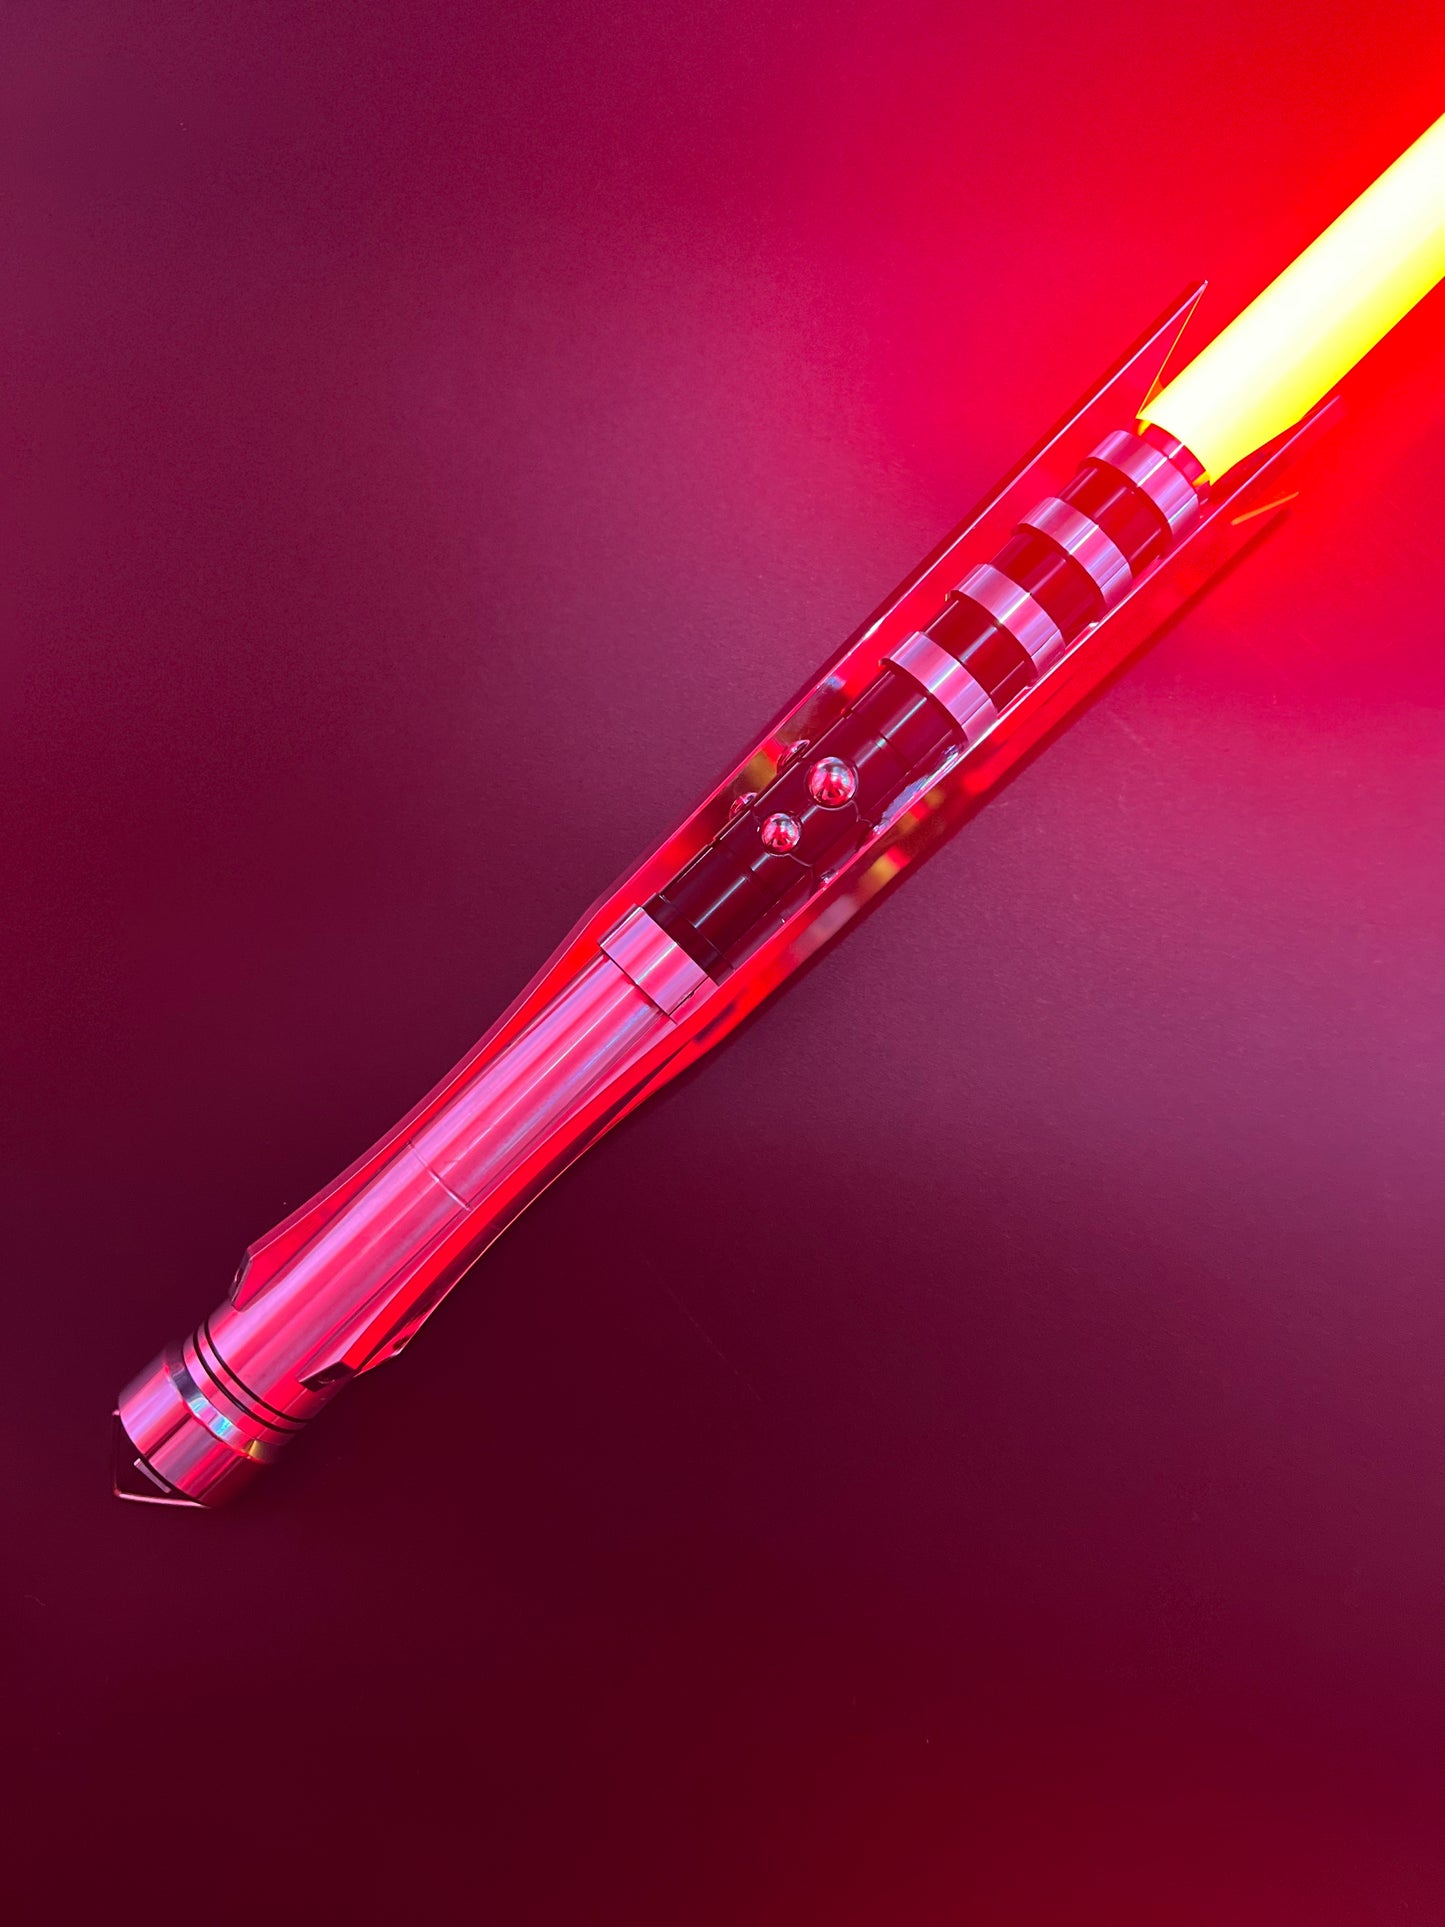 THE SHADOW OF REVAN LIGHTSABER